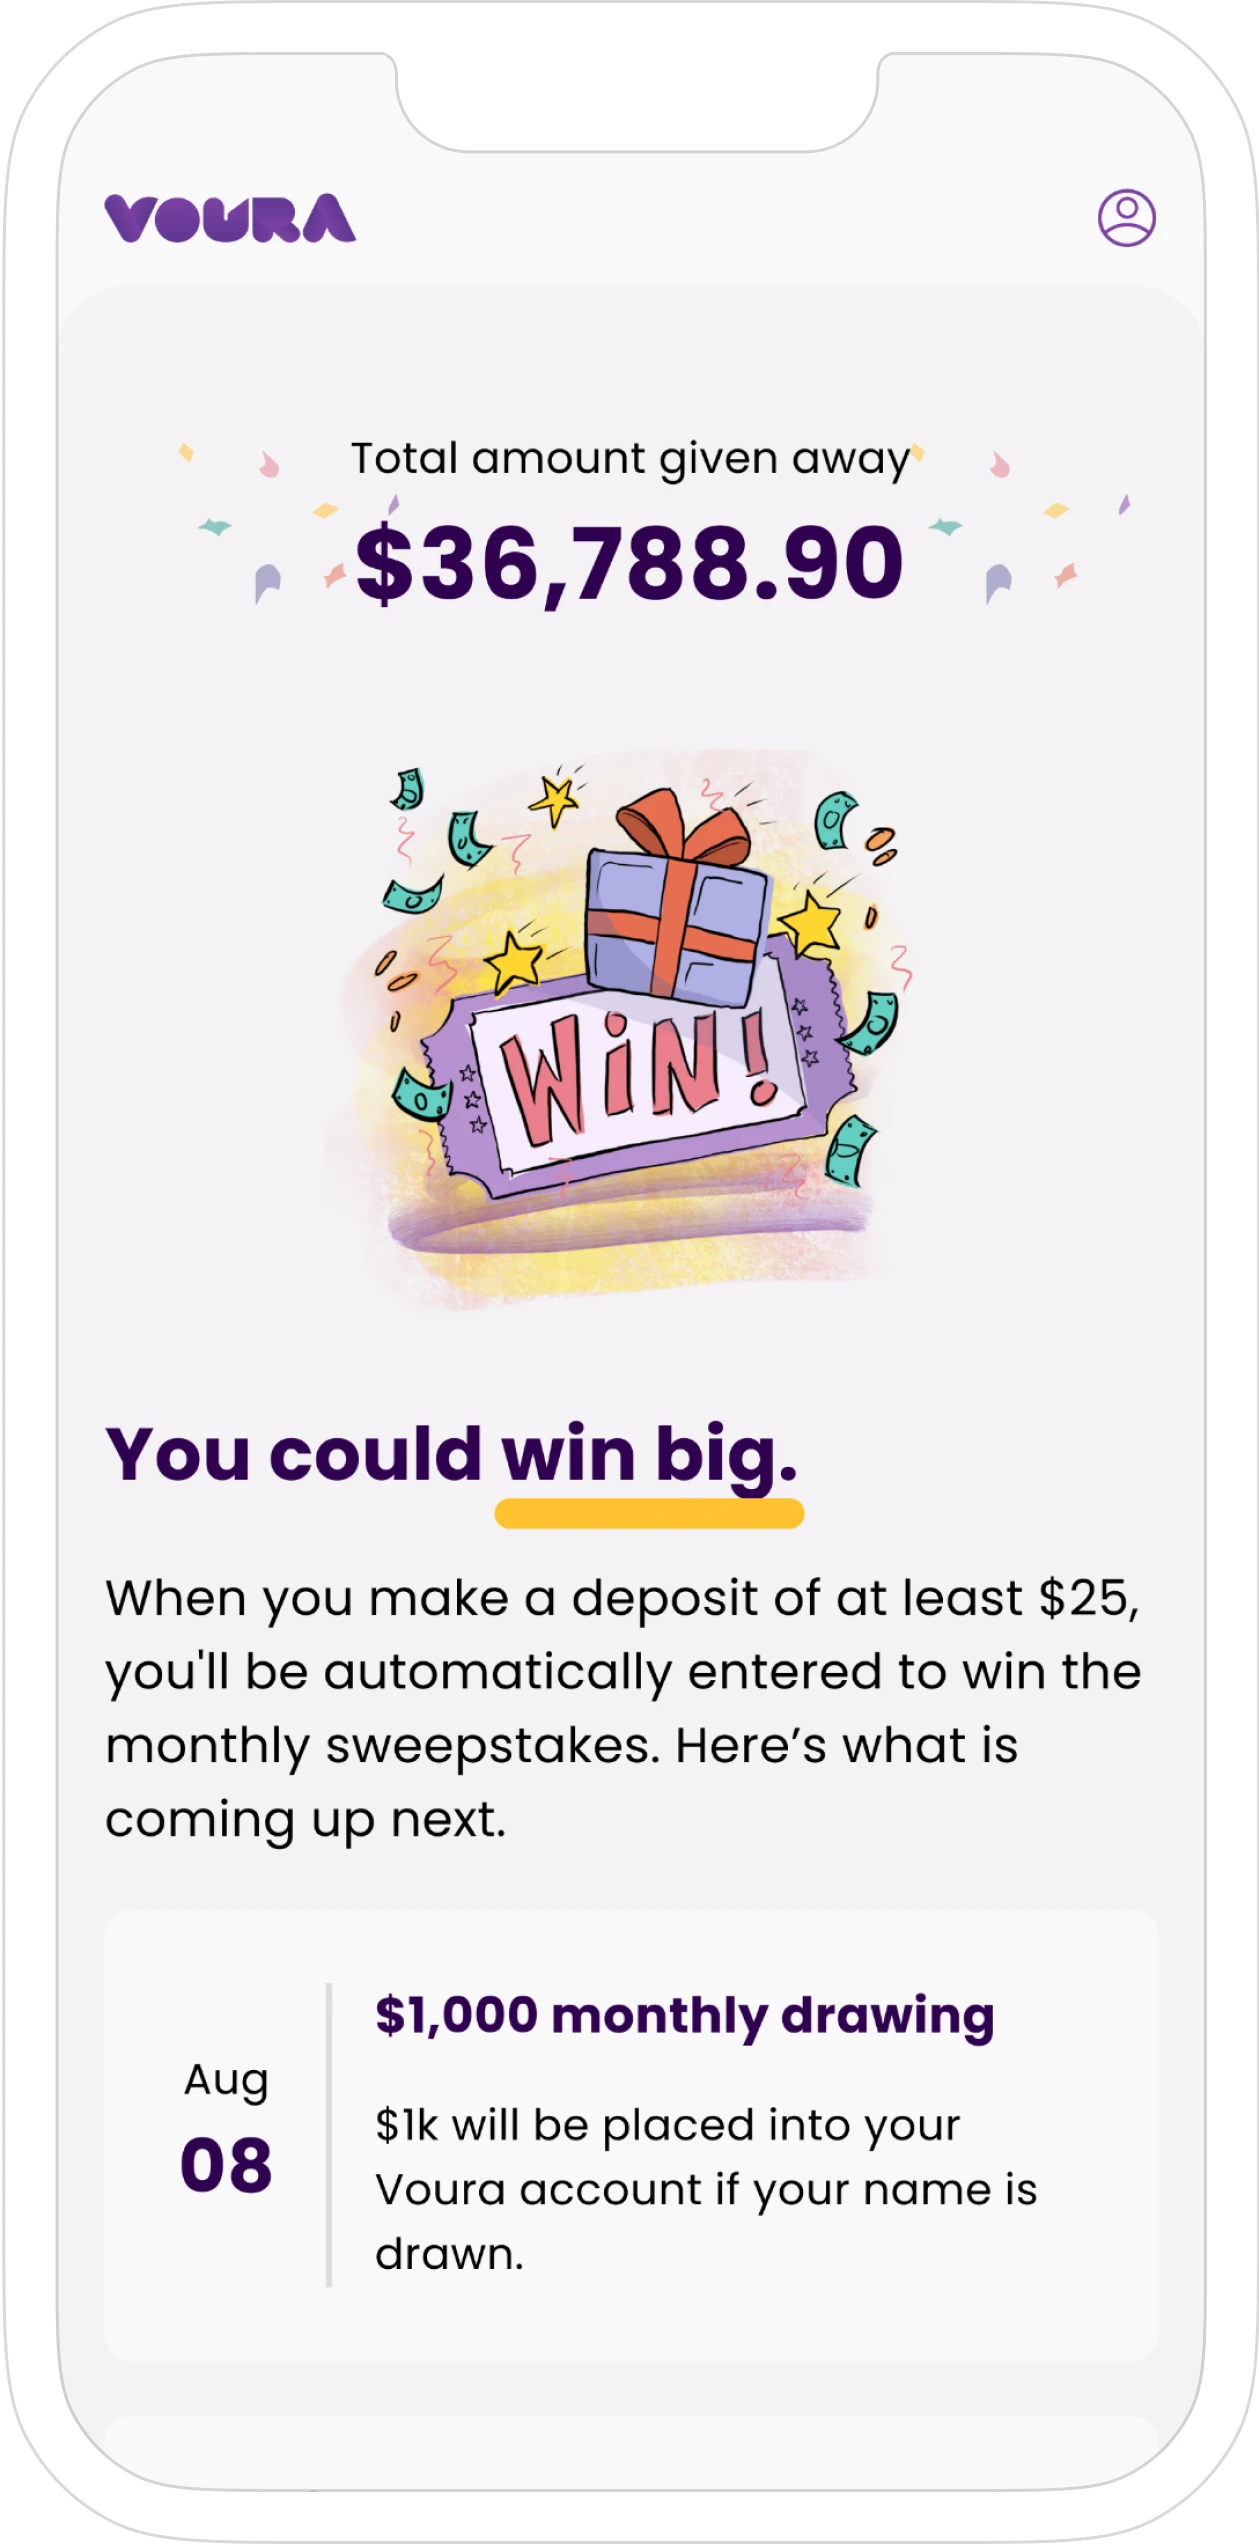 Mobile phone with Voura app dashboard screen, showing total amount given away of $36,788.90. Screen also says 'You could win big. When you make a deposit of at least $25, you'll be automatically entered to win the monthly sweepstakes.'